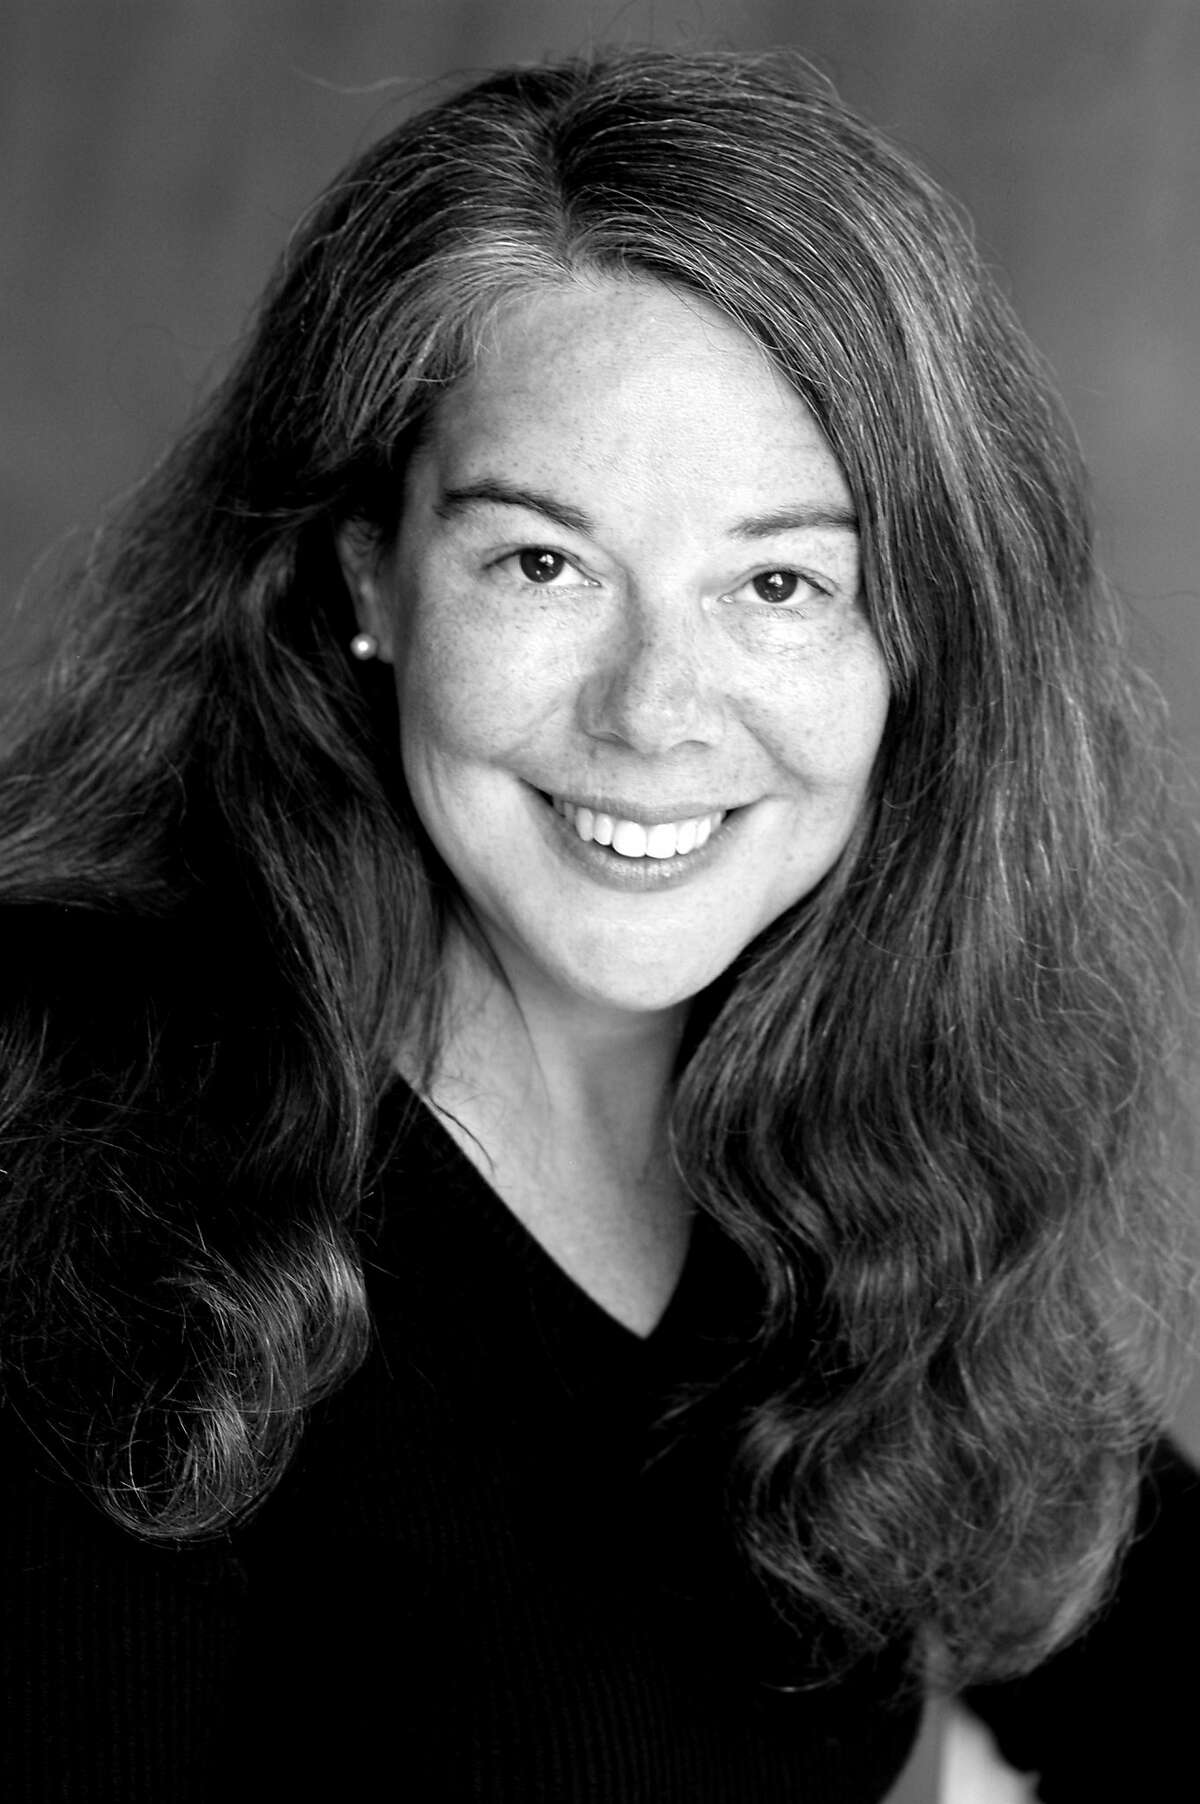 Casey Stangl.jpg Director Casey Stangl returns to American Conservatory Theater, where she directed "Venus in Fur" last year, to helm Caryl Churchill's "Love and Information," the first play on stage at the newly refurbished Strand Theater. The show runs through Aug. 9. Photo courtesy of American Conservatory Theater